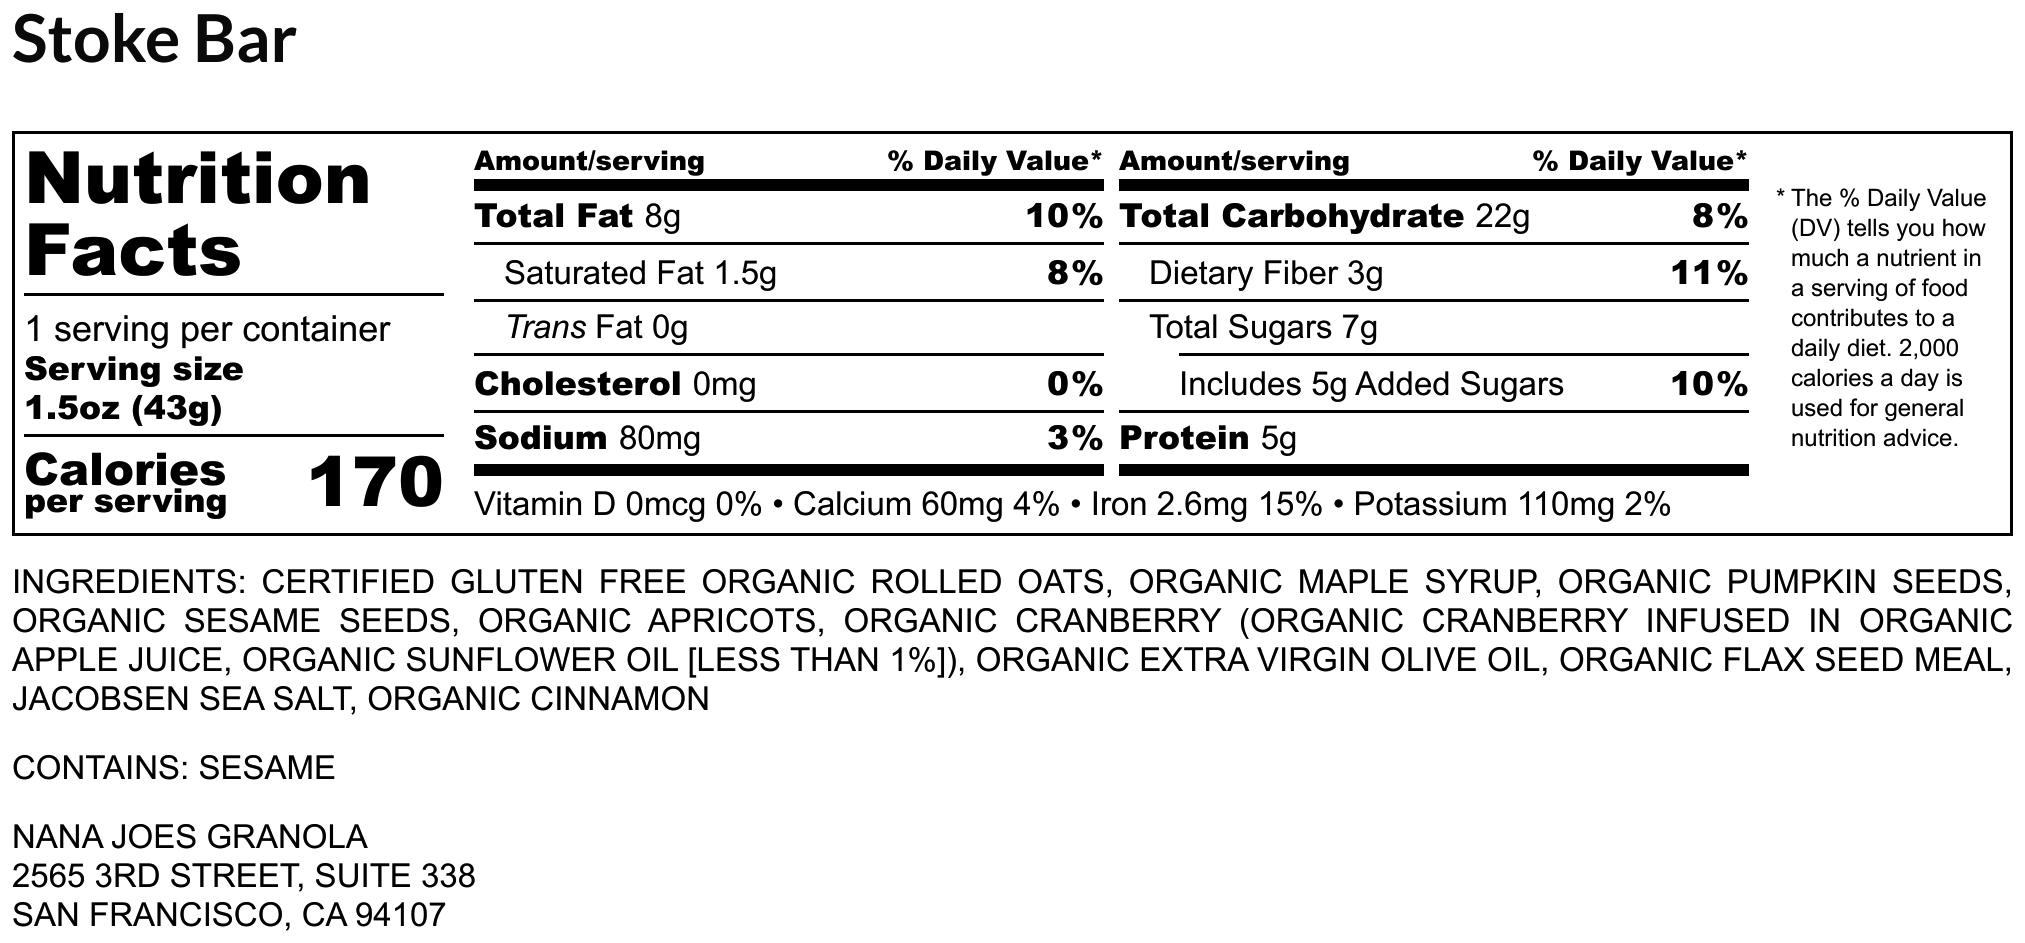 nutrition facts image